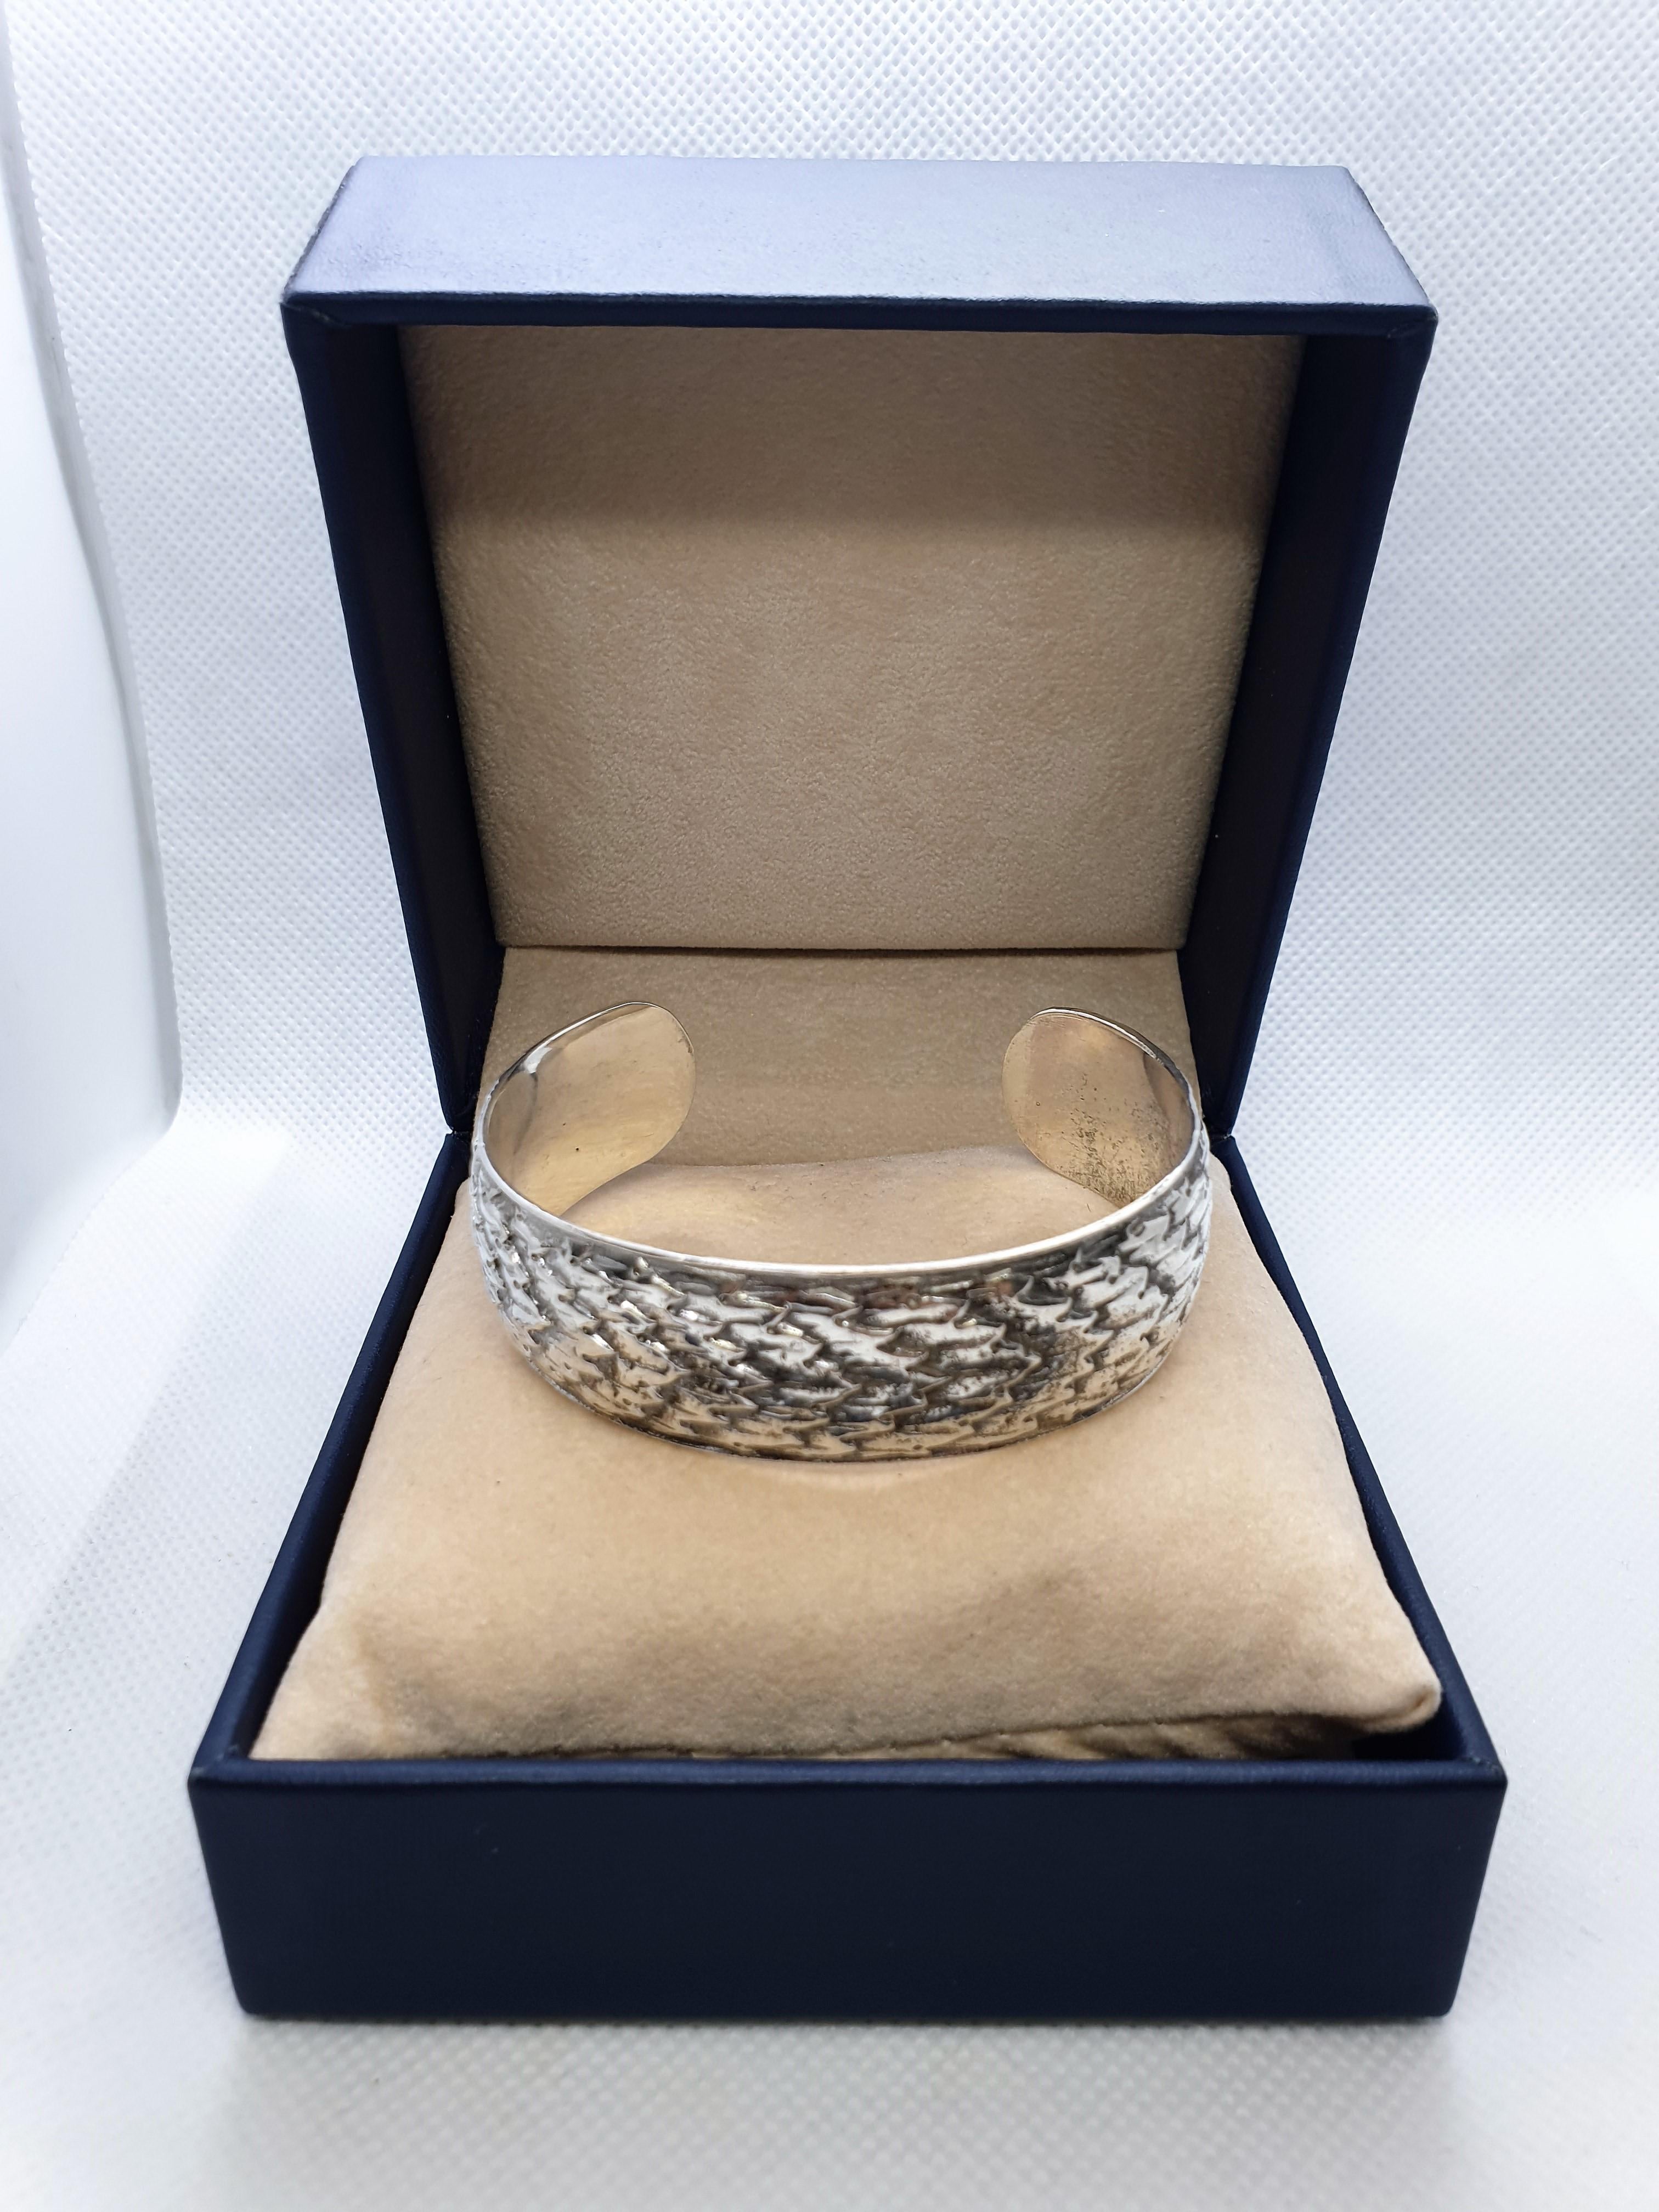 Sterling silver bangle bracelet by Mario Buccellati.

Excellent manufacture. 

Good condition.

Sterling Silver, relized around 1950s.

